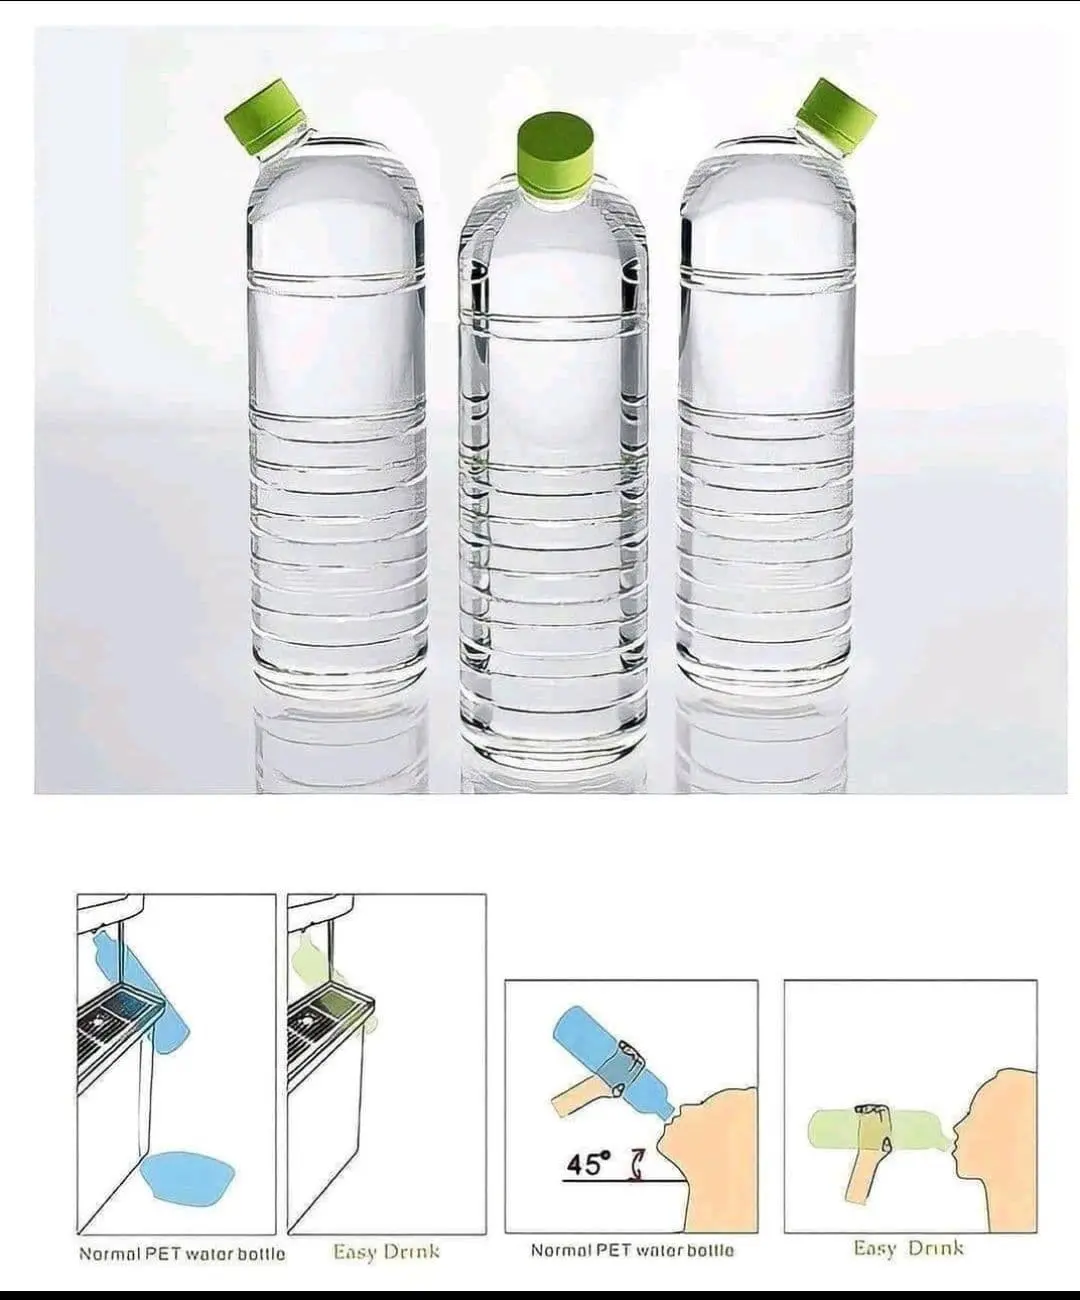 Bottle with modified neck